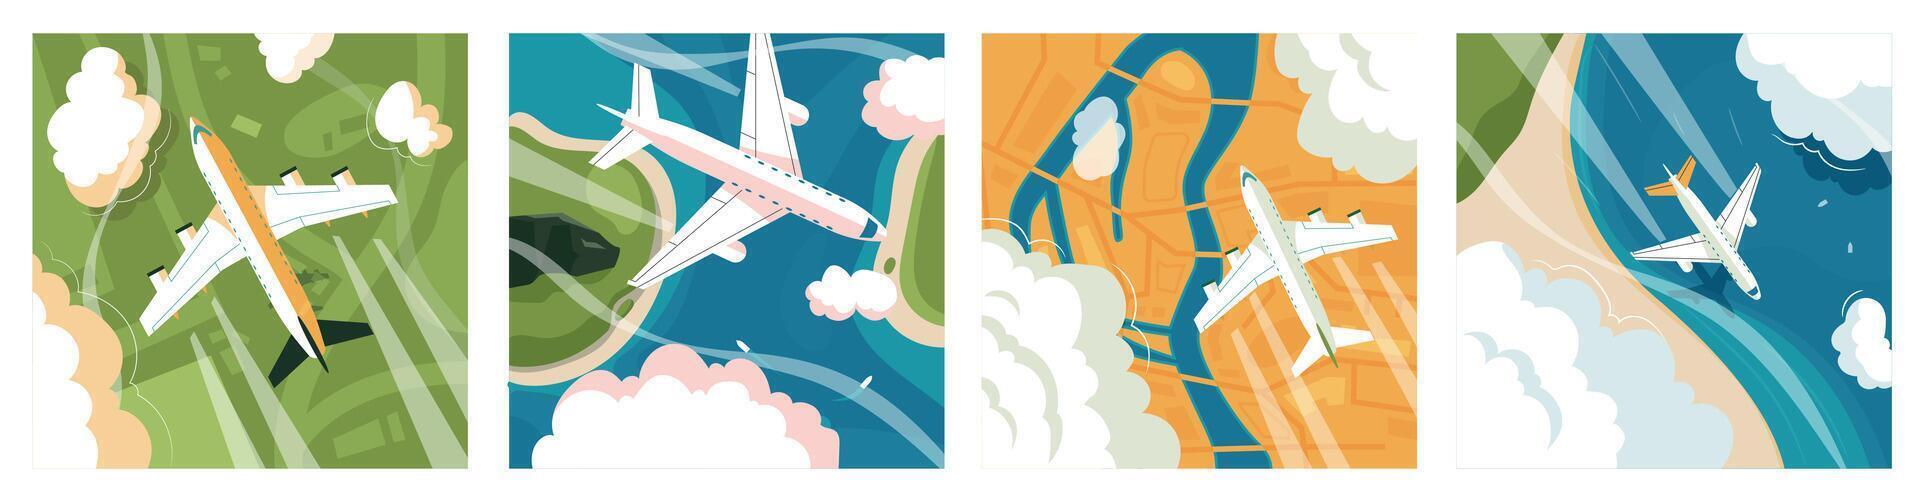 Airplane top view background. Square banner with aerial view of passenger plane flying over woods sea coast and green planes. Vector aviation aerial view illustrations